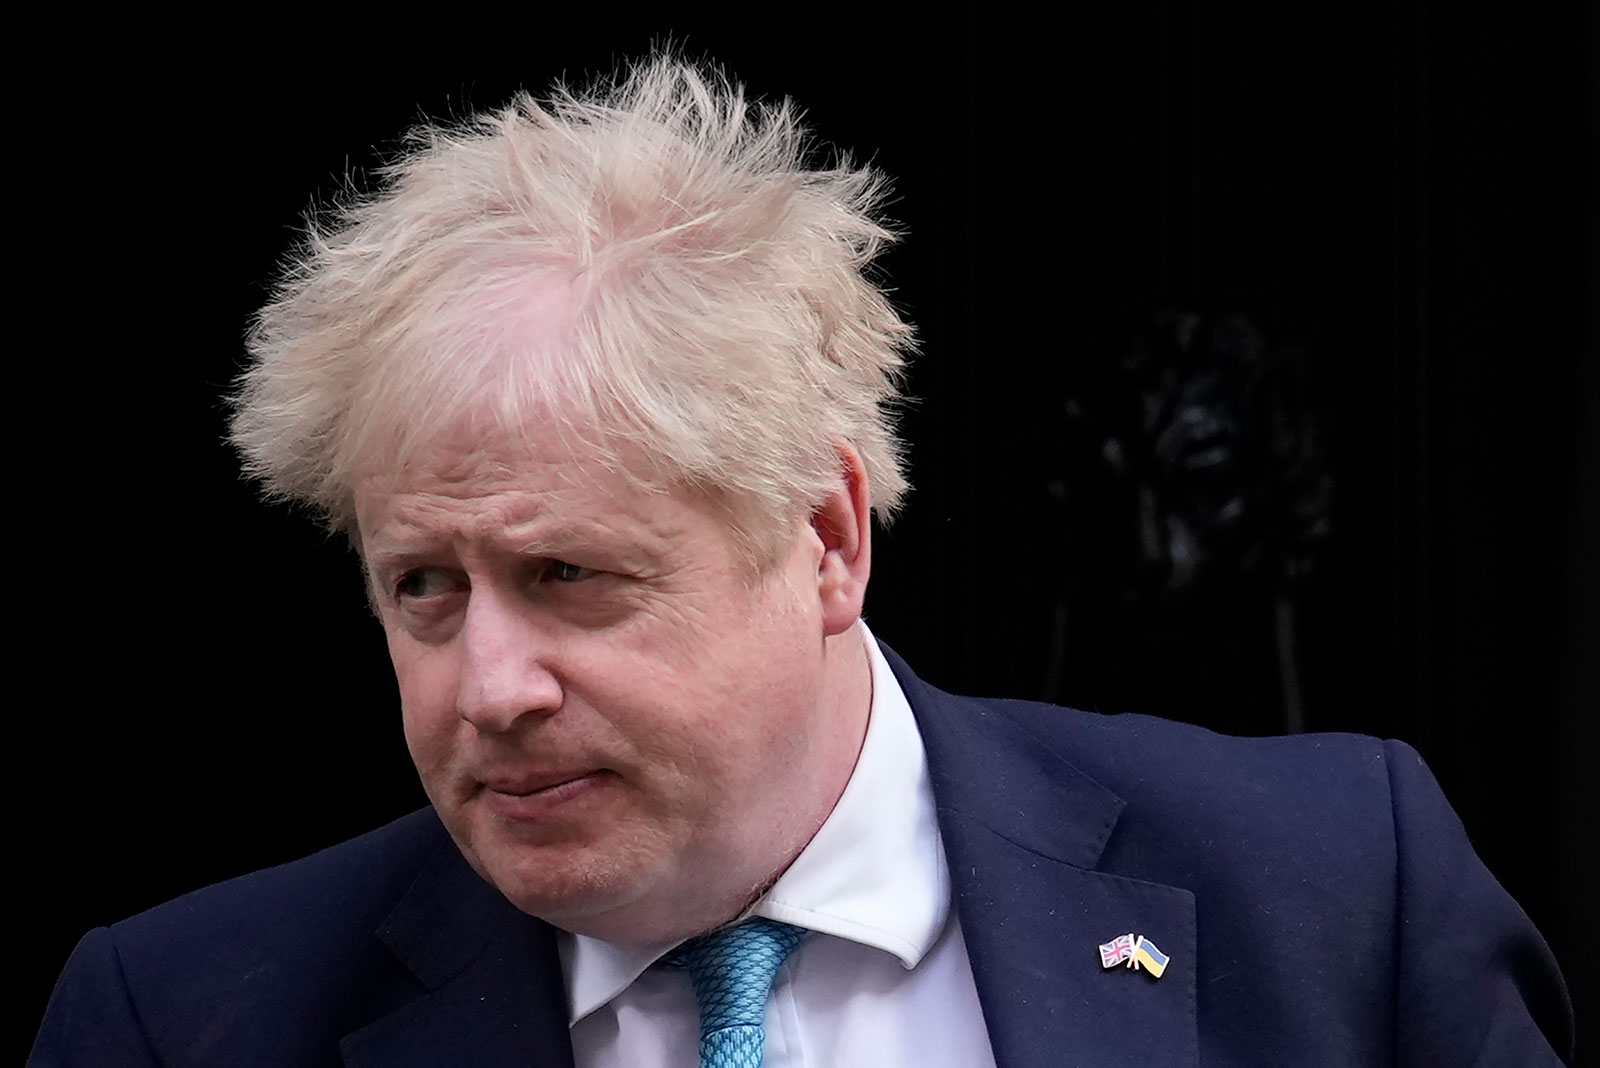 British Prime Minister Boris Johnson leaves 10 Downing Street in London on March 9.